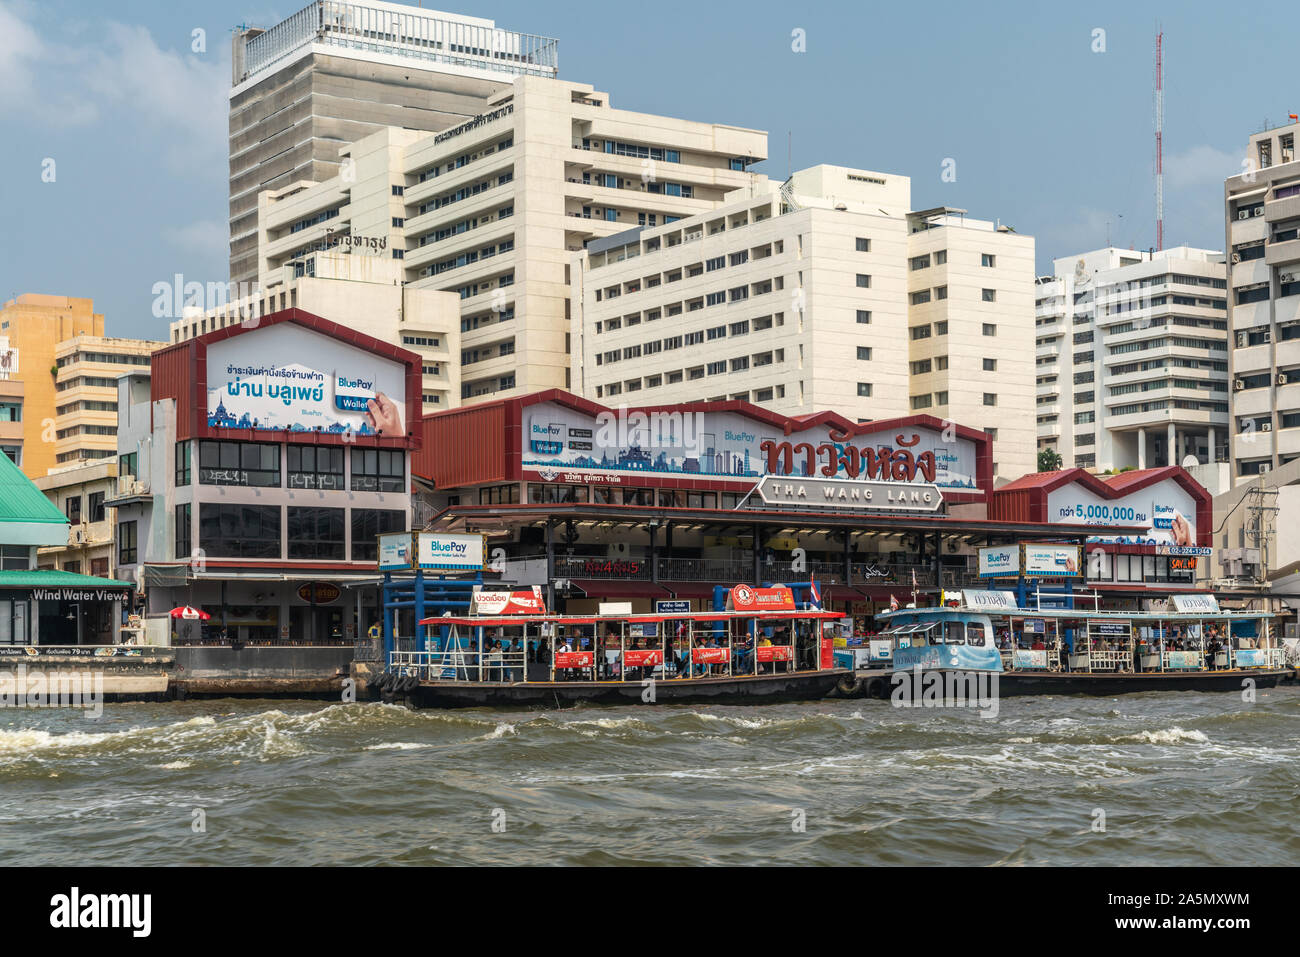 Bangkok city, Thailand - March 17, 2019: Chao Phraya River. Maroon painted Tha Wang Lang market and shopping mall with ferries docked in front. White Stock Photo